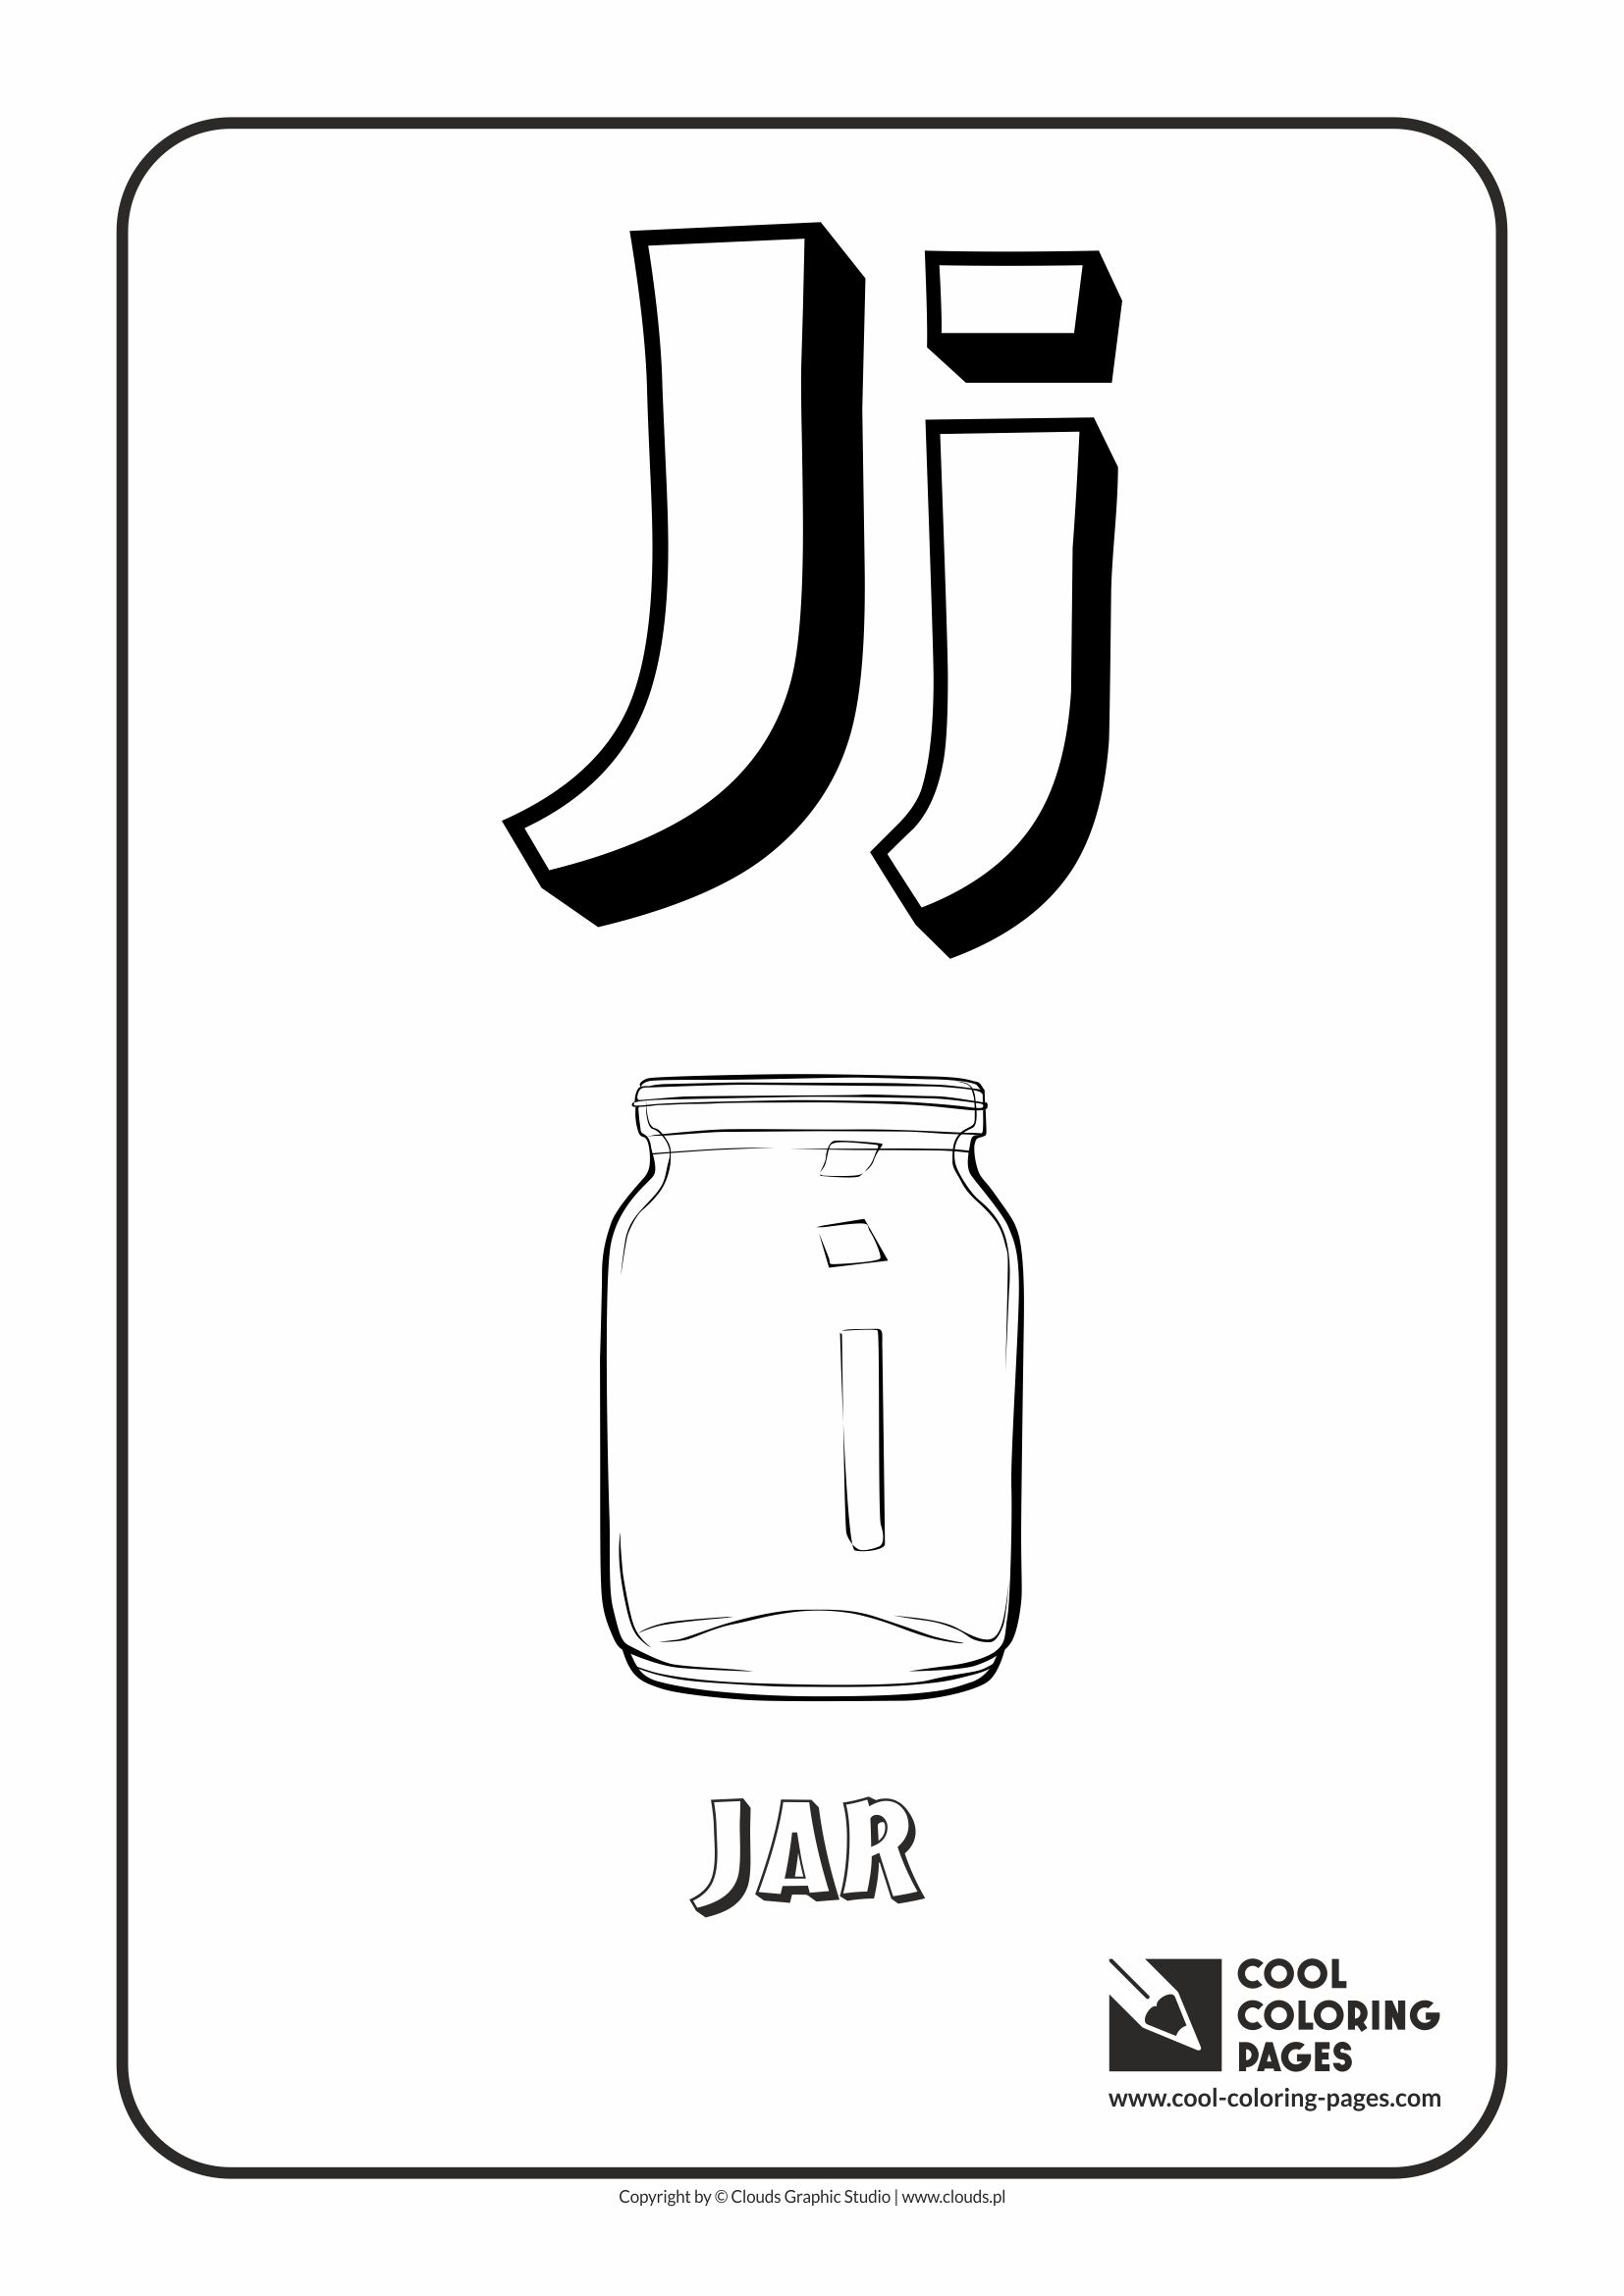 Cool Coloring Pages - Alphabet / Letter J / Coloring page with letter J